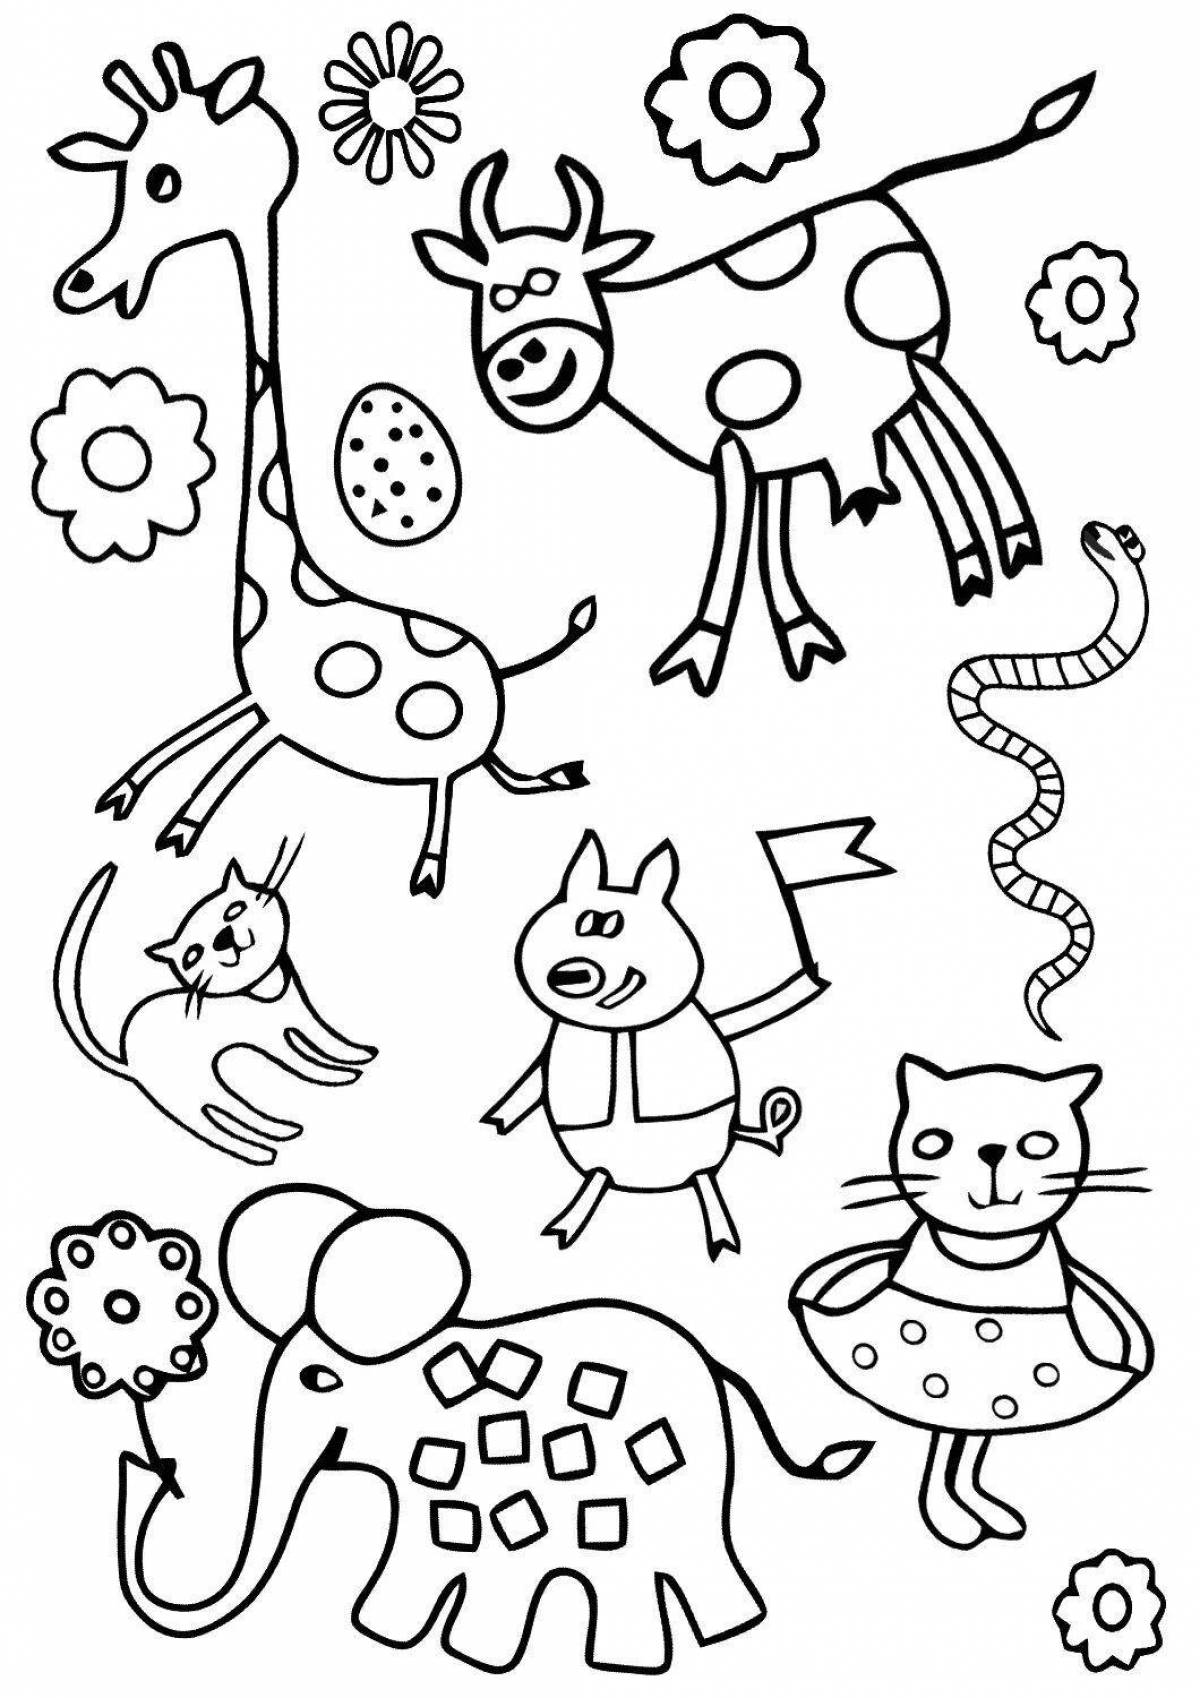 Fun coloring stickers for kids